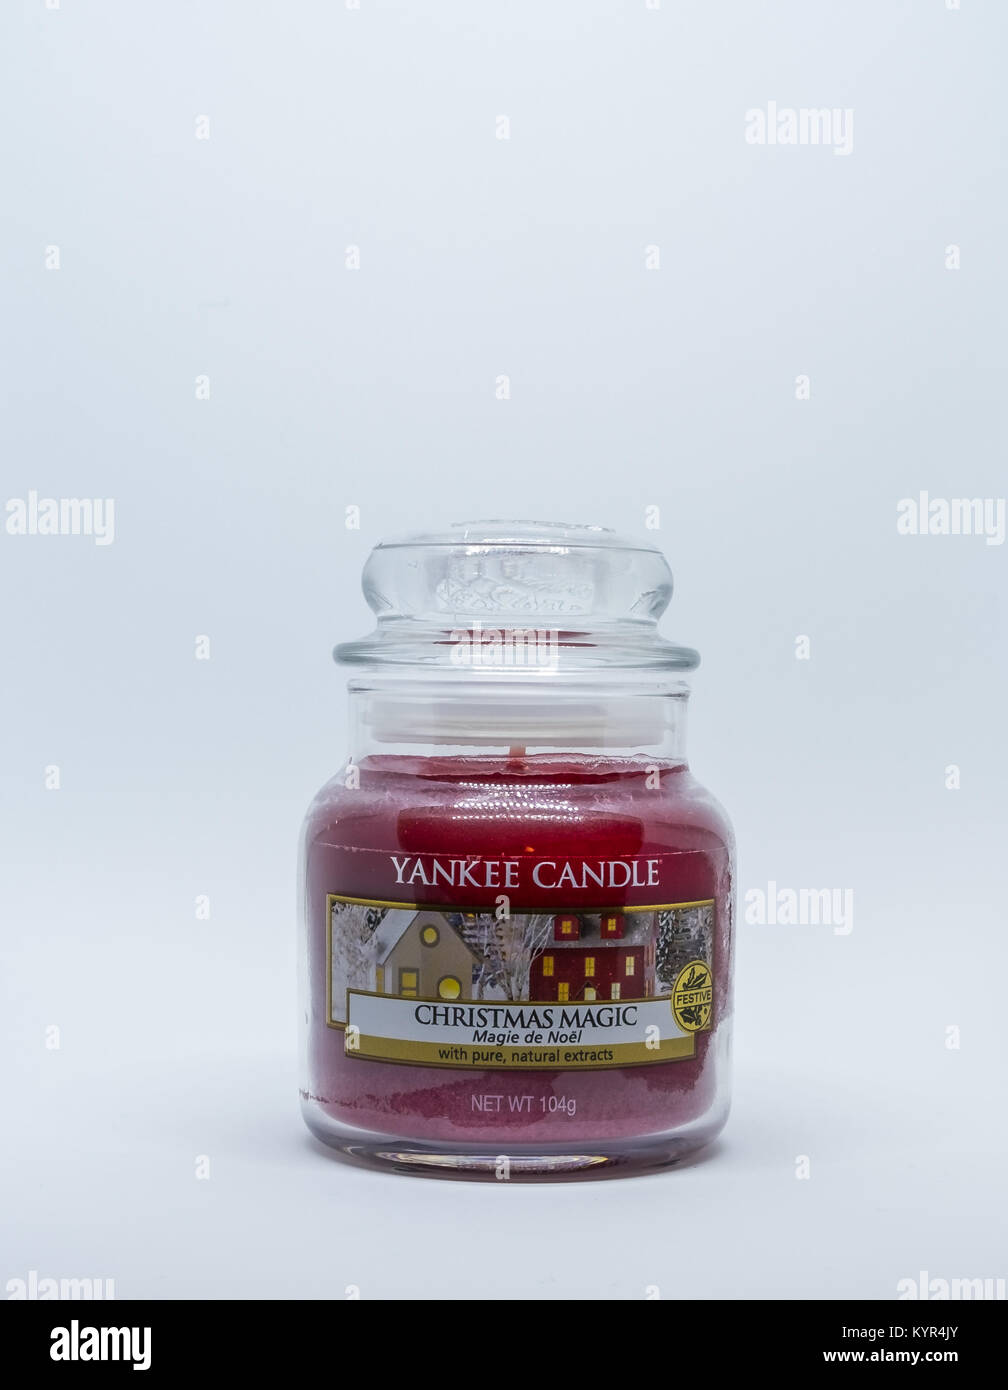 Largs, Scotland, UK - January 14, 2018: A small glass Jar containing a Yankee Candle popular in many modern homes giving off an aromatic fragrance. Ta Stock Photo